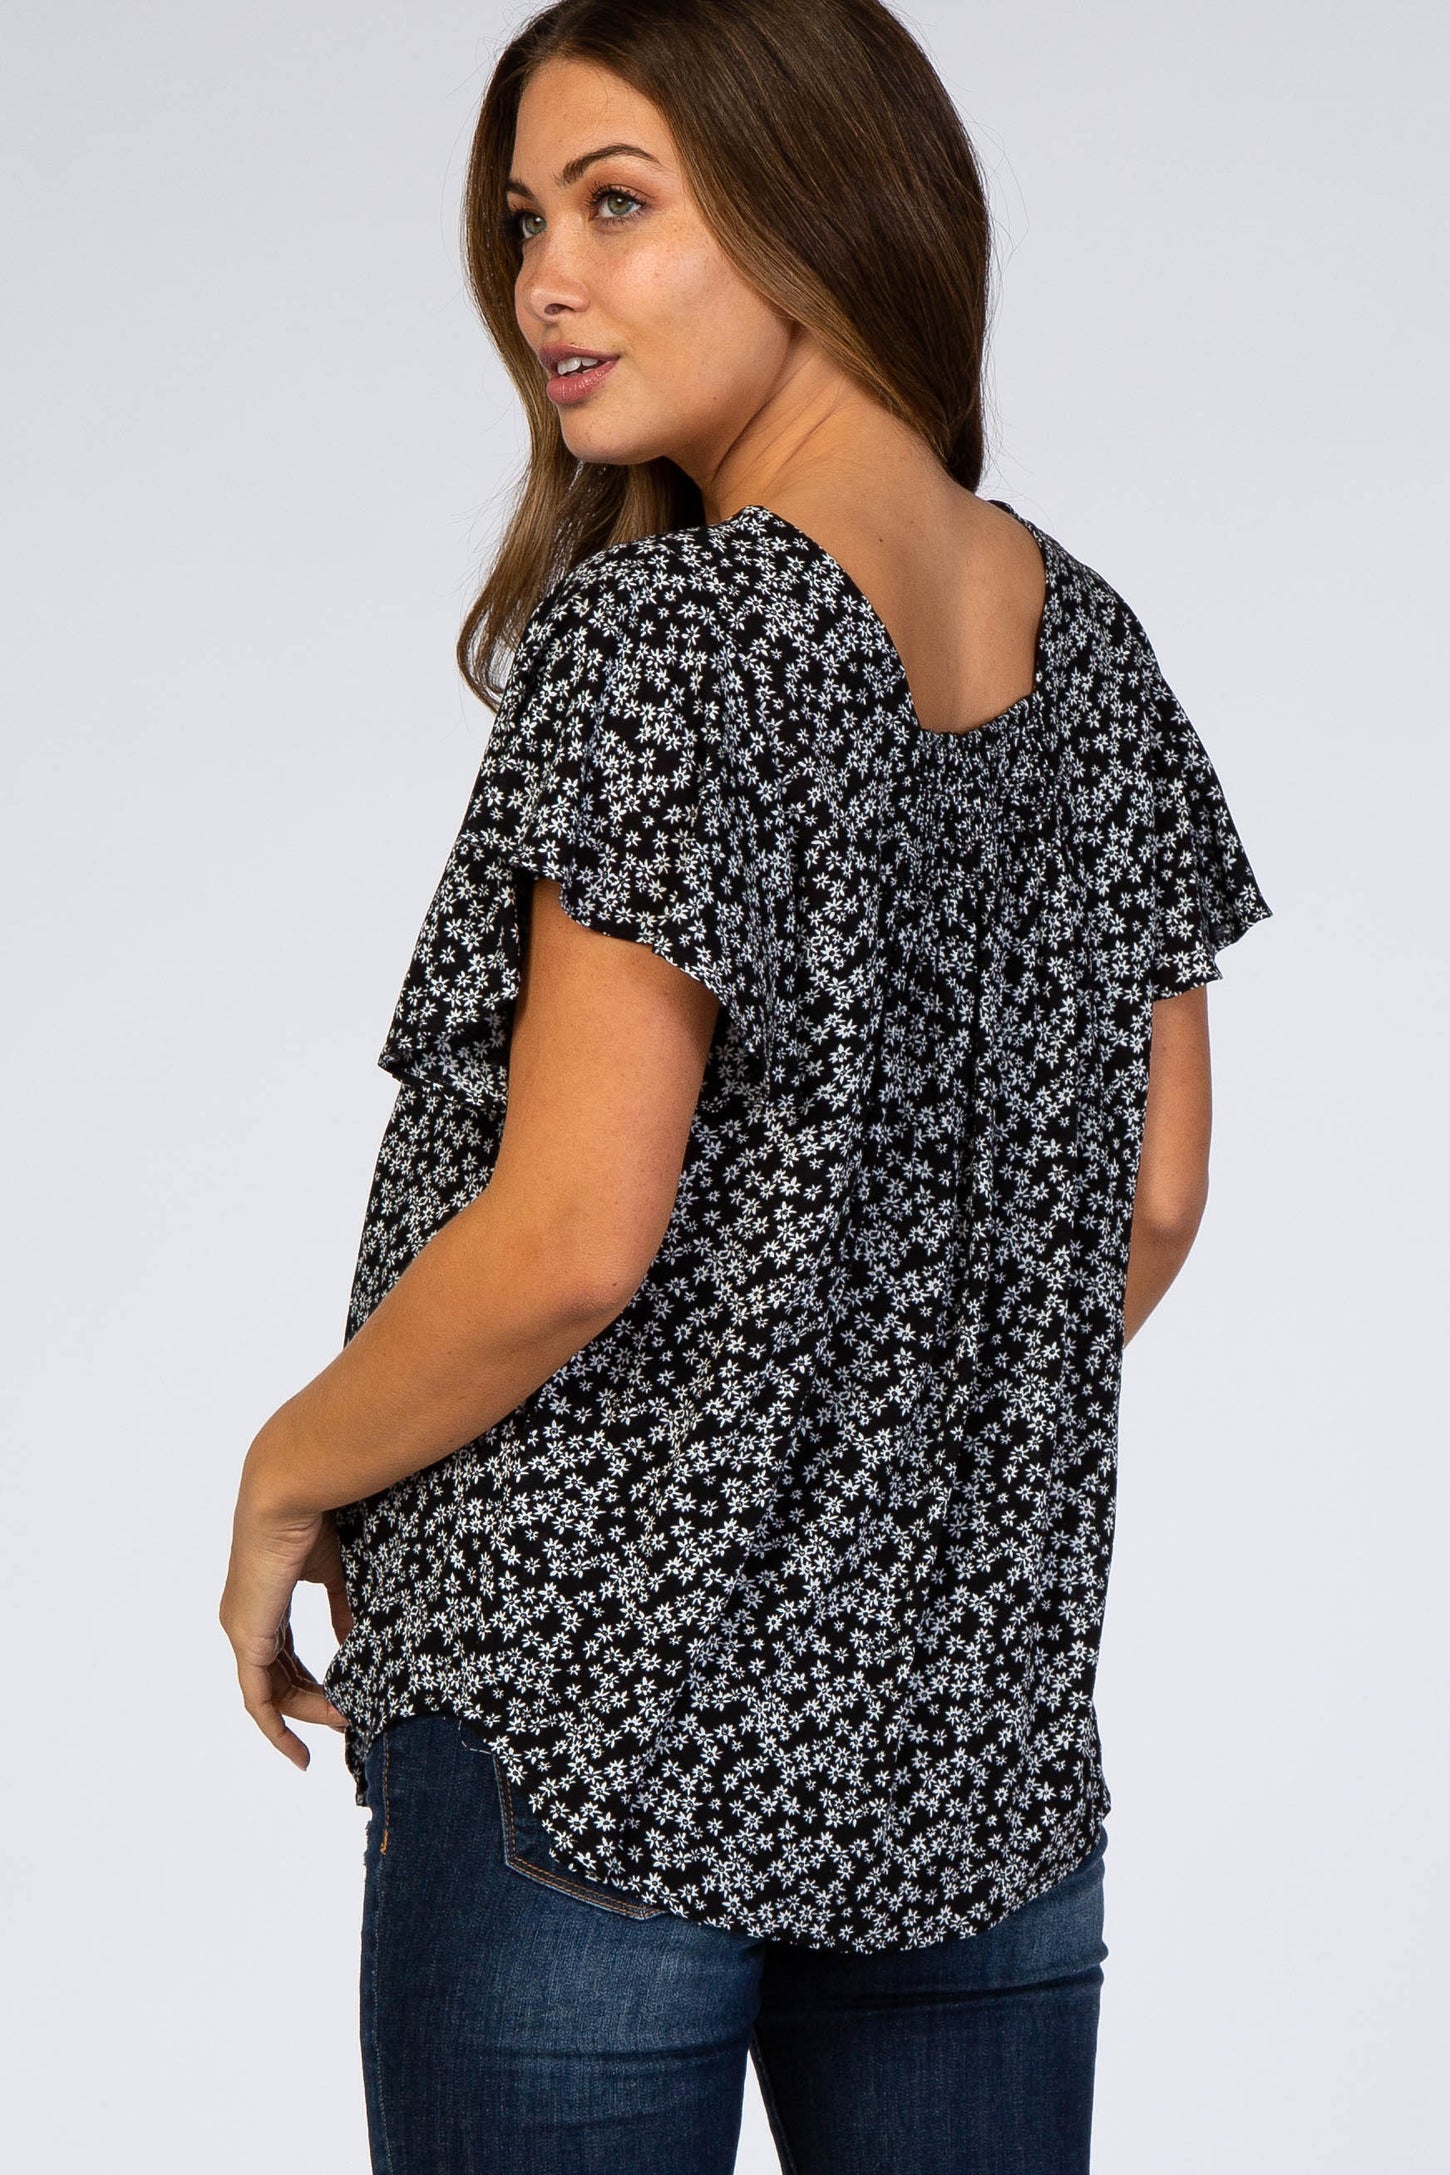 Black Floral Button Down Maternity Top– PinkBlush